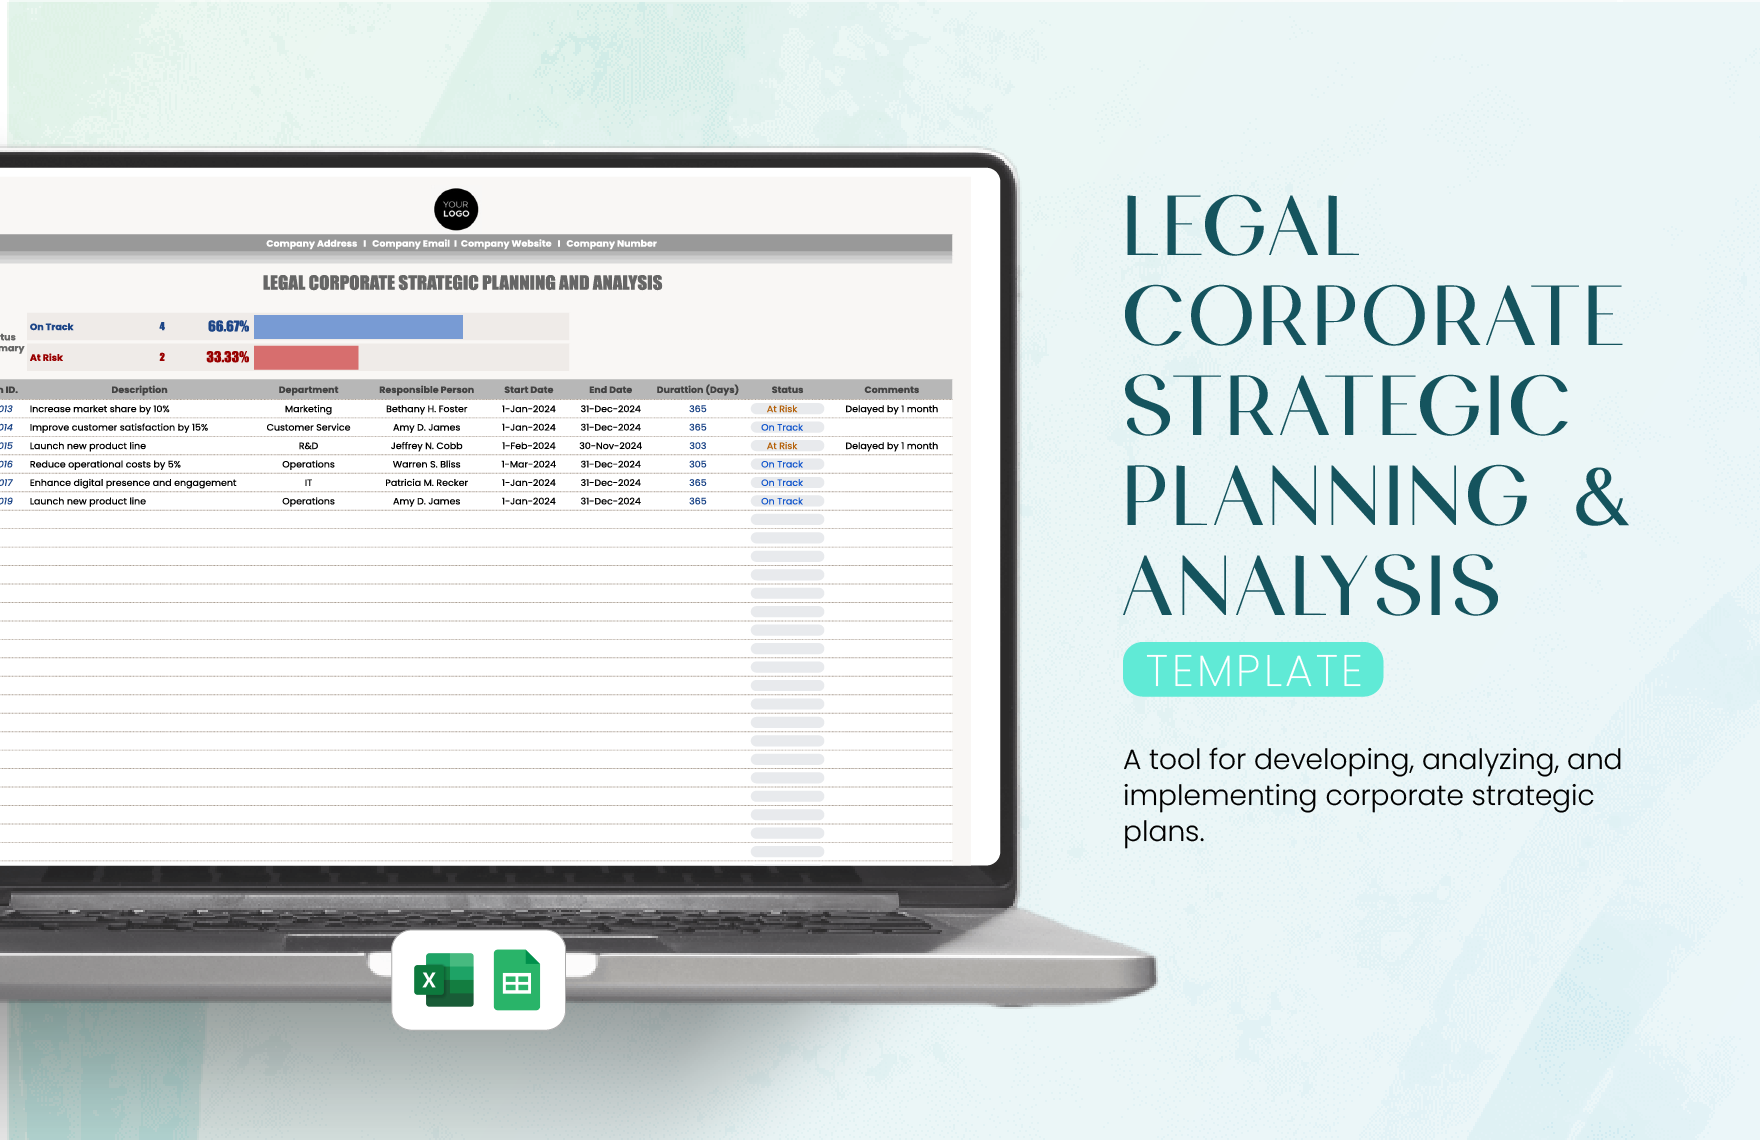 Legal Corporate Strategic Planning and Analysis Template in Excel, Google Sheets